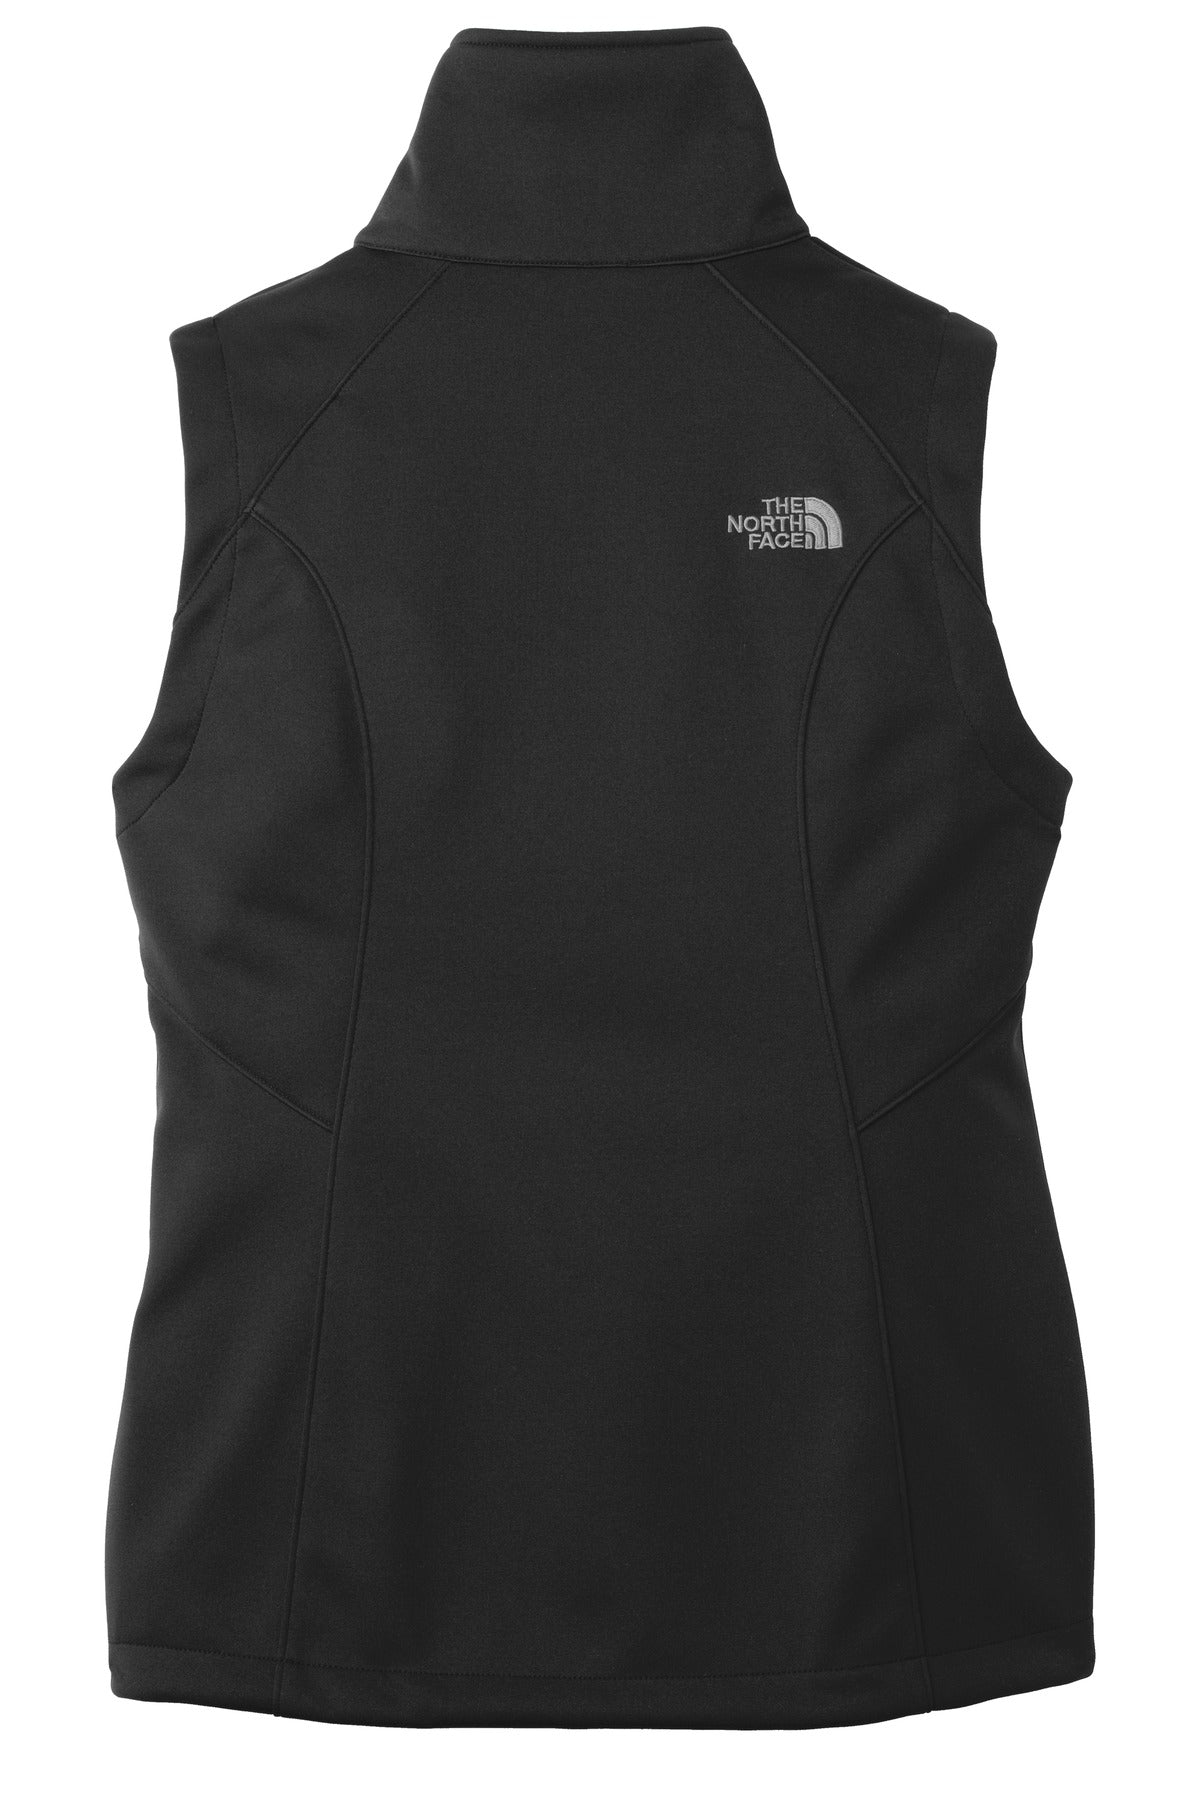 The North Face Ladies Ridgewall Soft Shell Vest. NF0A3LH1